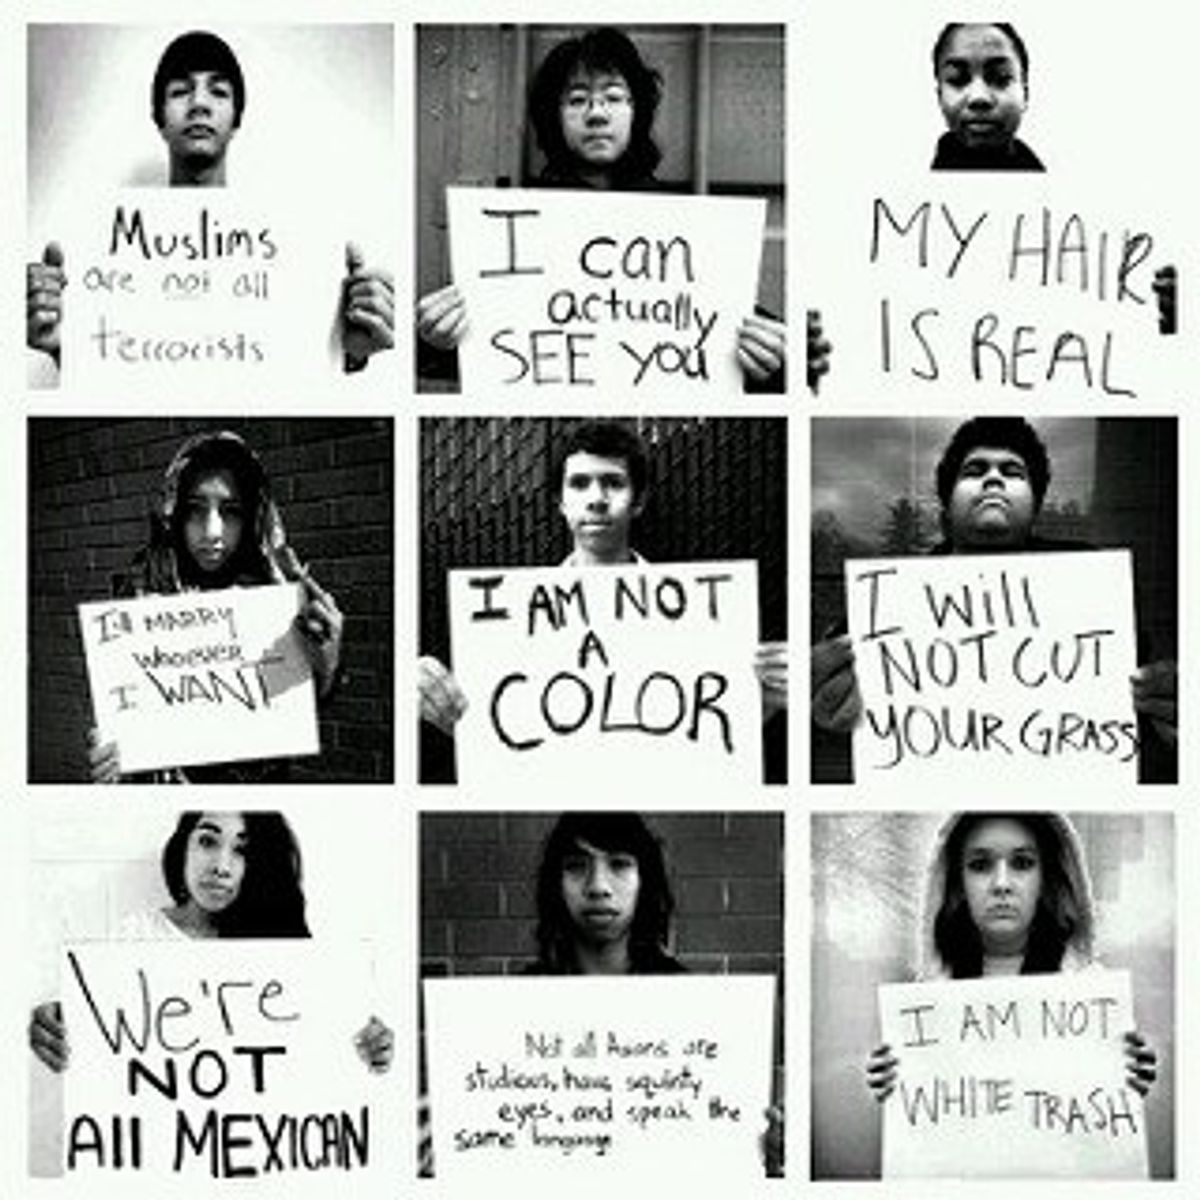 Is Racism The Problem?